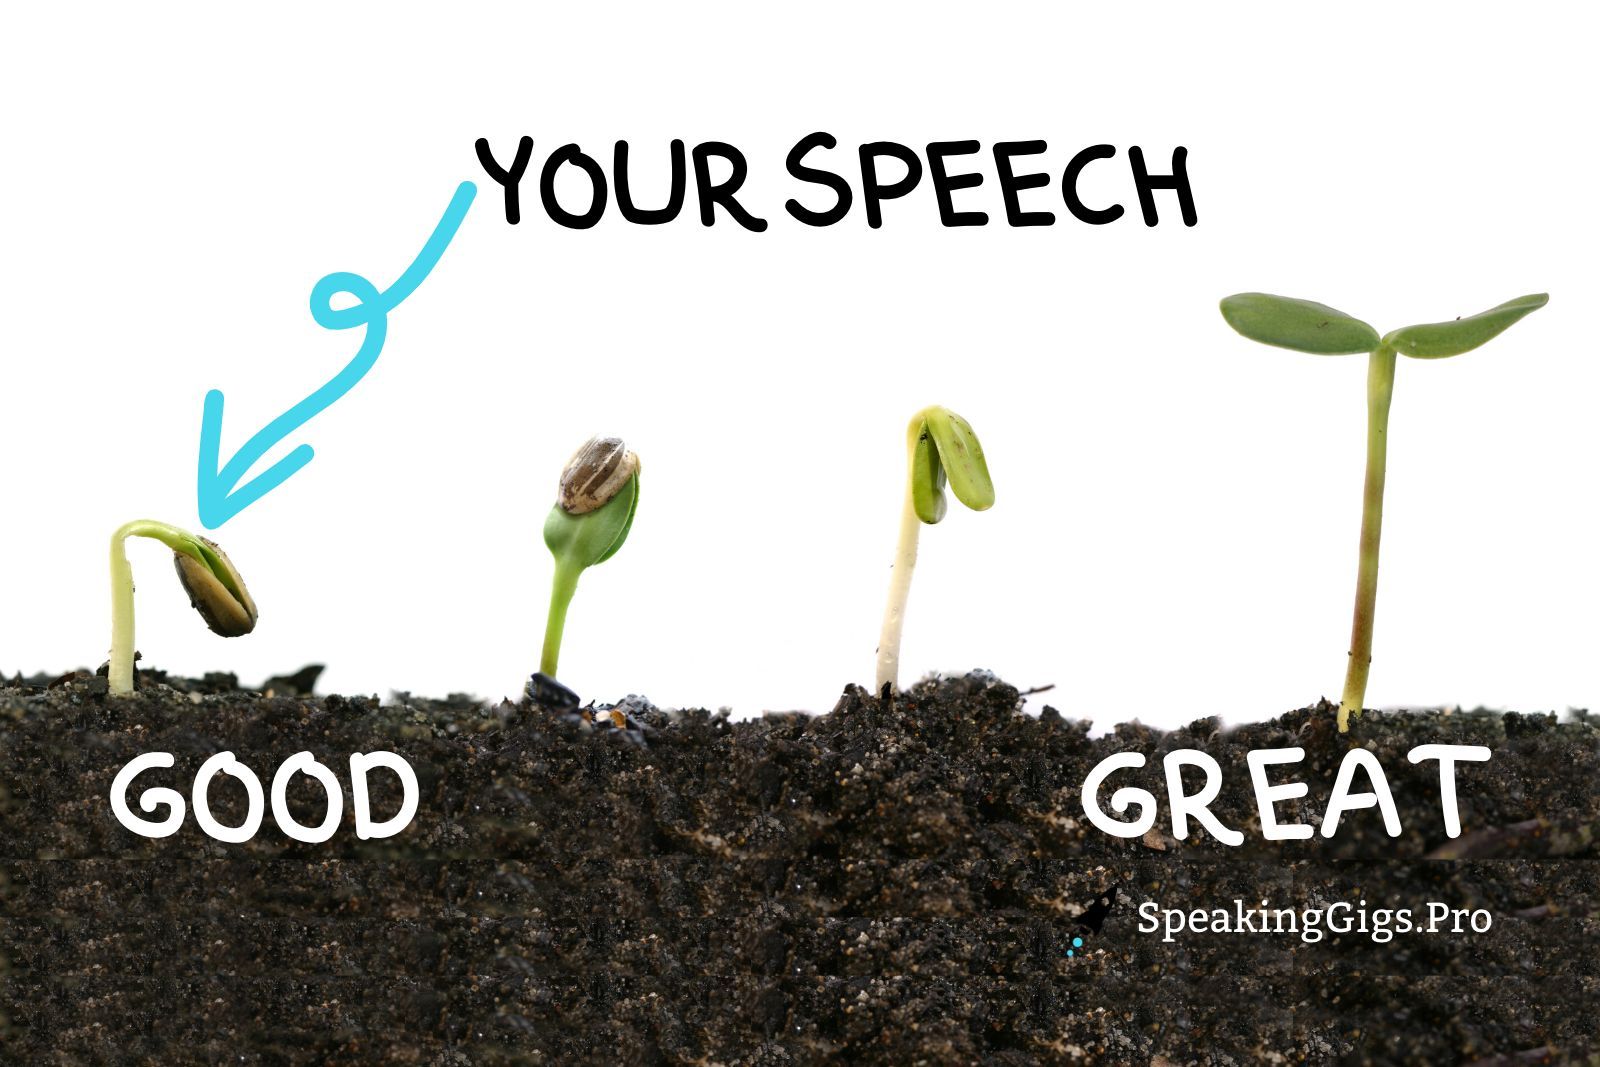 How to Transform Your Speech from Good to Great (Without Destroying What’s Good)